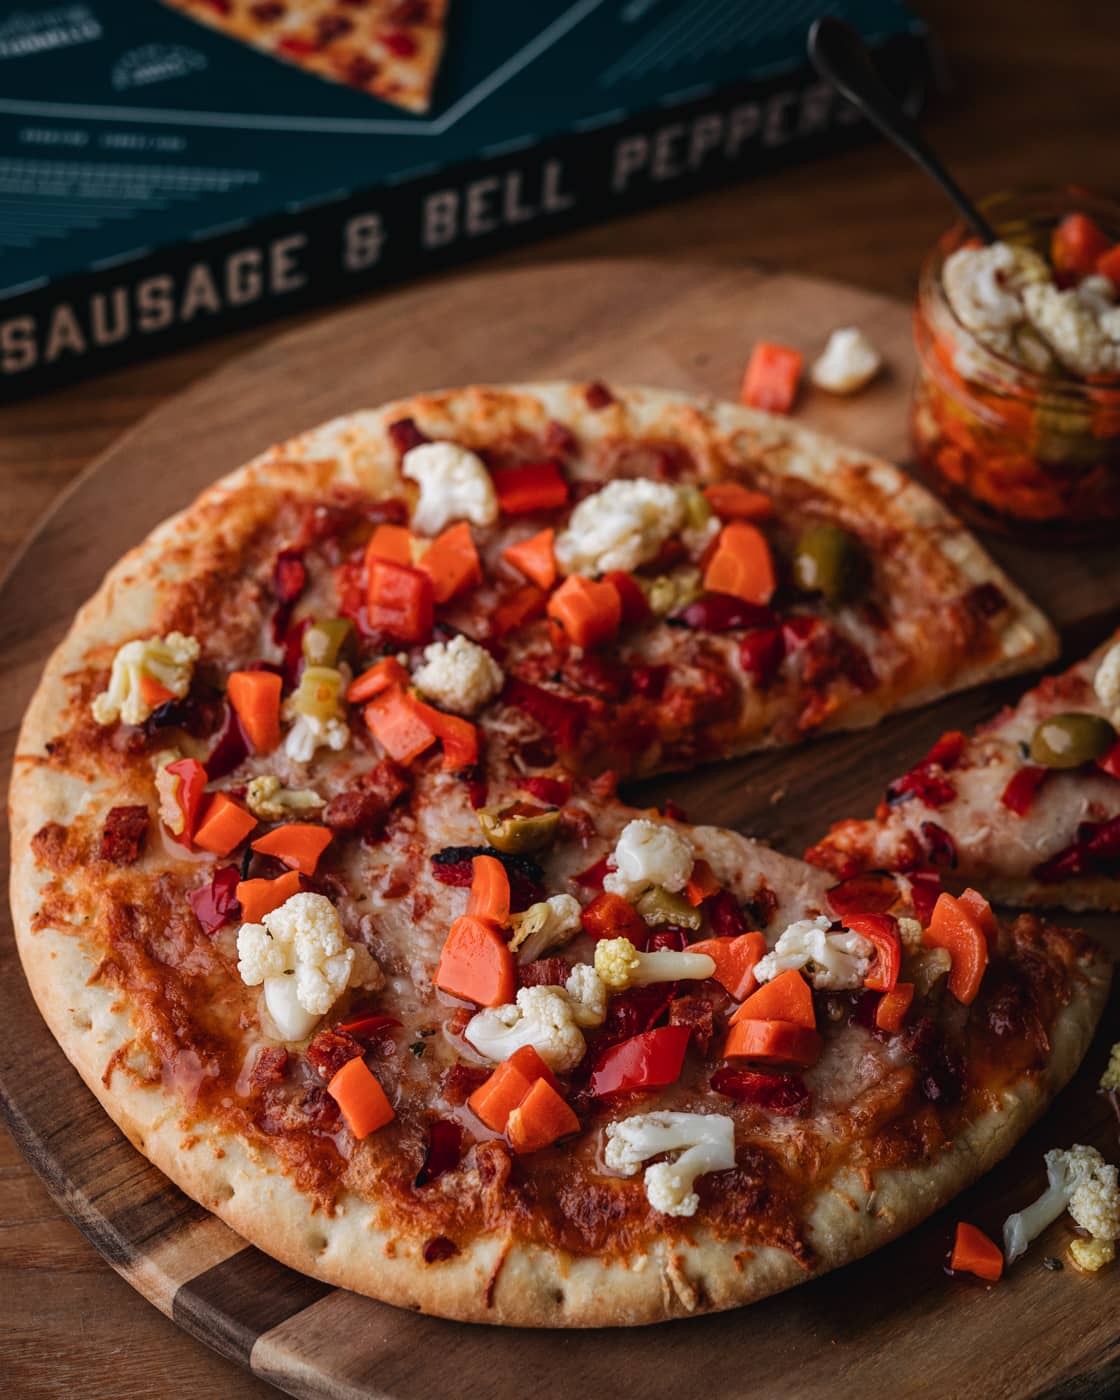 SAUSAGE & BELL PEPPER PIZZA WITH GIARDINIERA